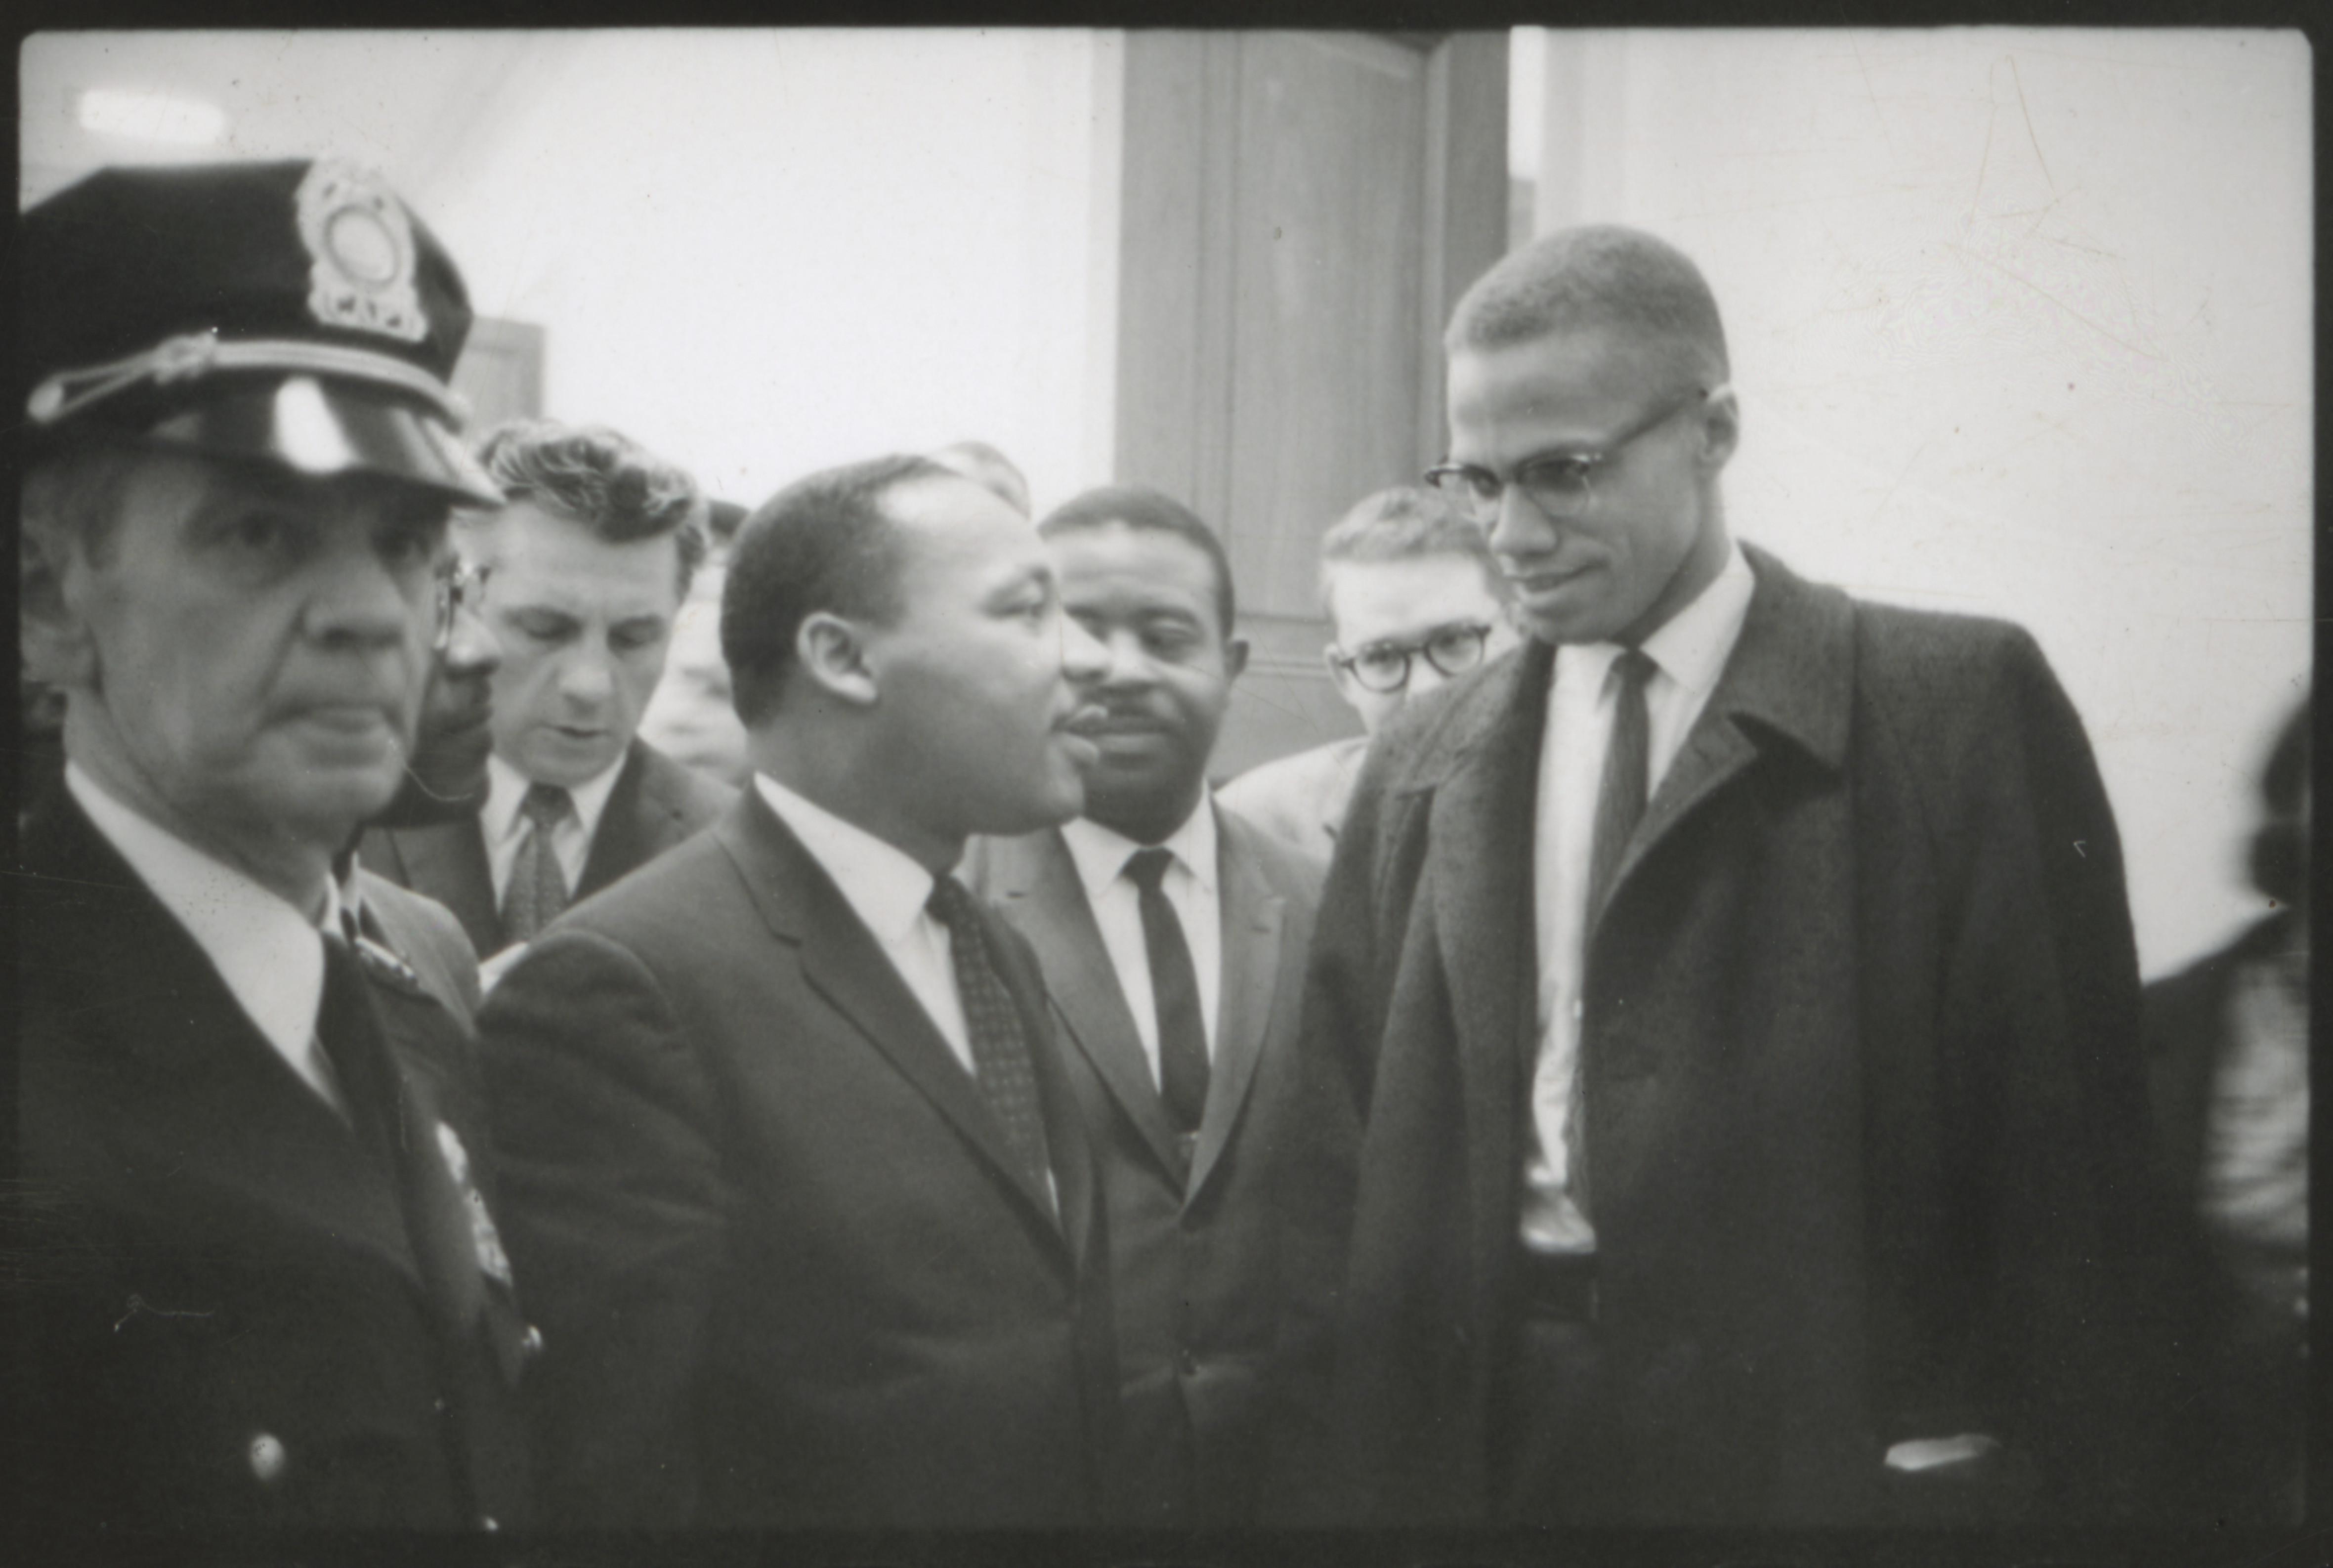 Martin Luther King and Malcolm X stand side by side surrounded by people in the hallway of the U.S. Capitol.